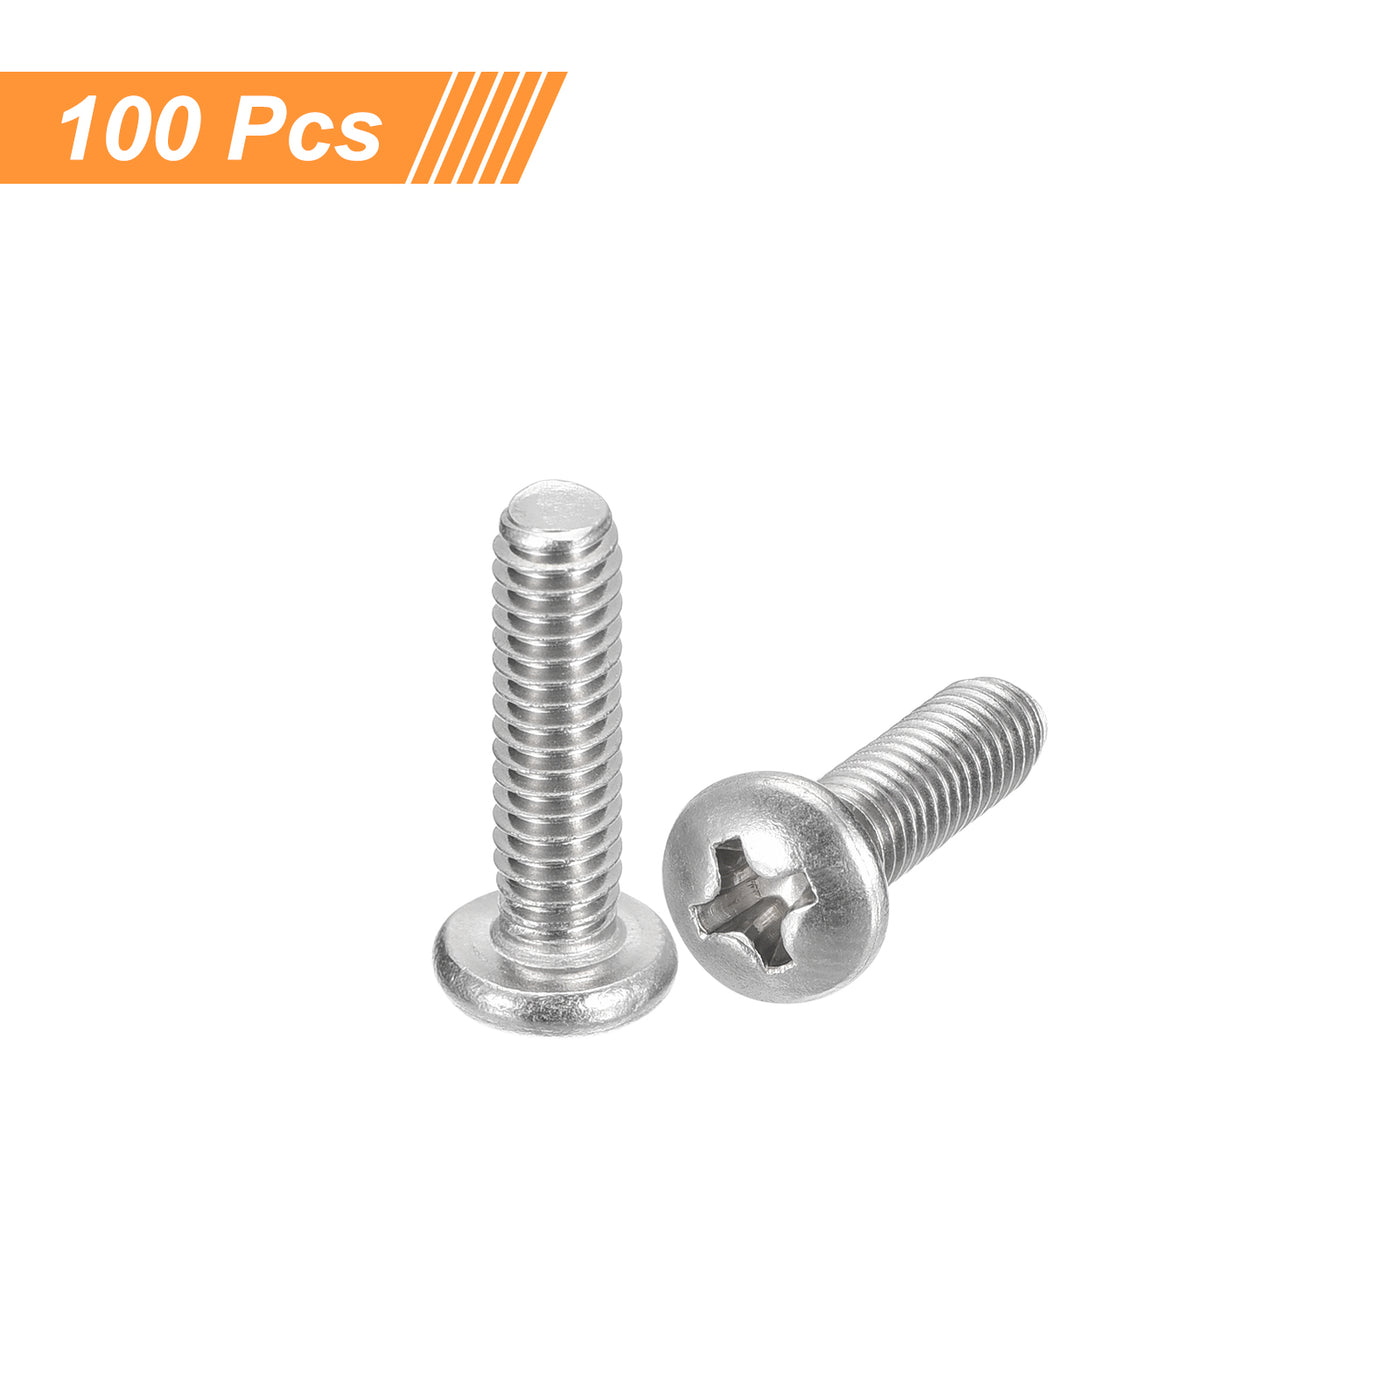 uxcell Uxcell #8-32x5/8" Pan Head Machine Screws, Stainless Steel 18-8 Screw, Pack of 100